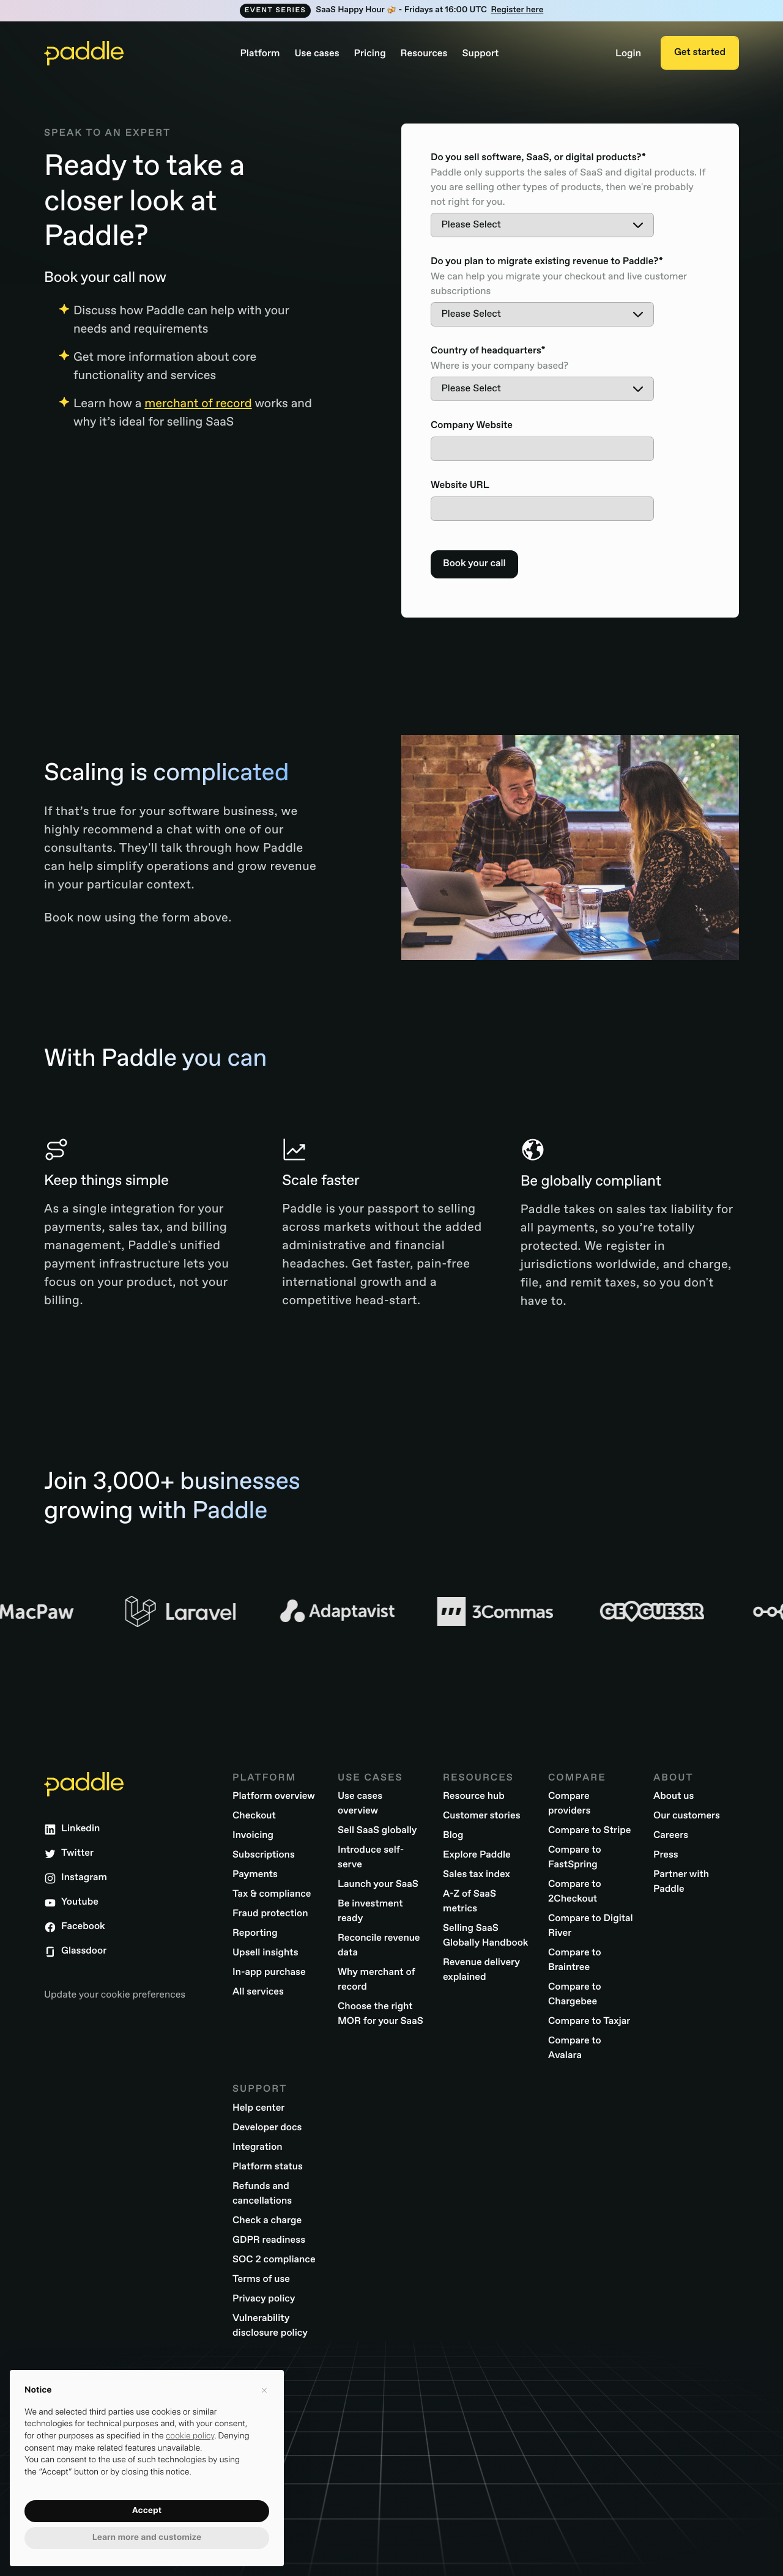 SaaS demo pages example of Speak to Sales: Explore how Paddle can help you grow | Paddle